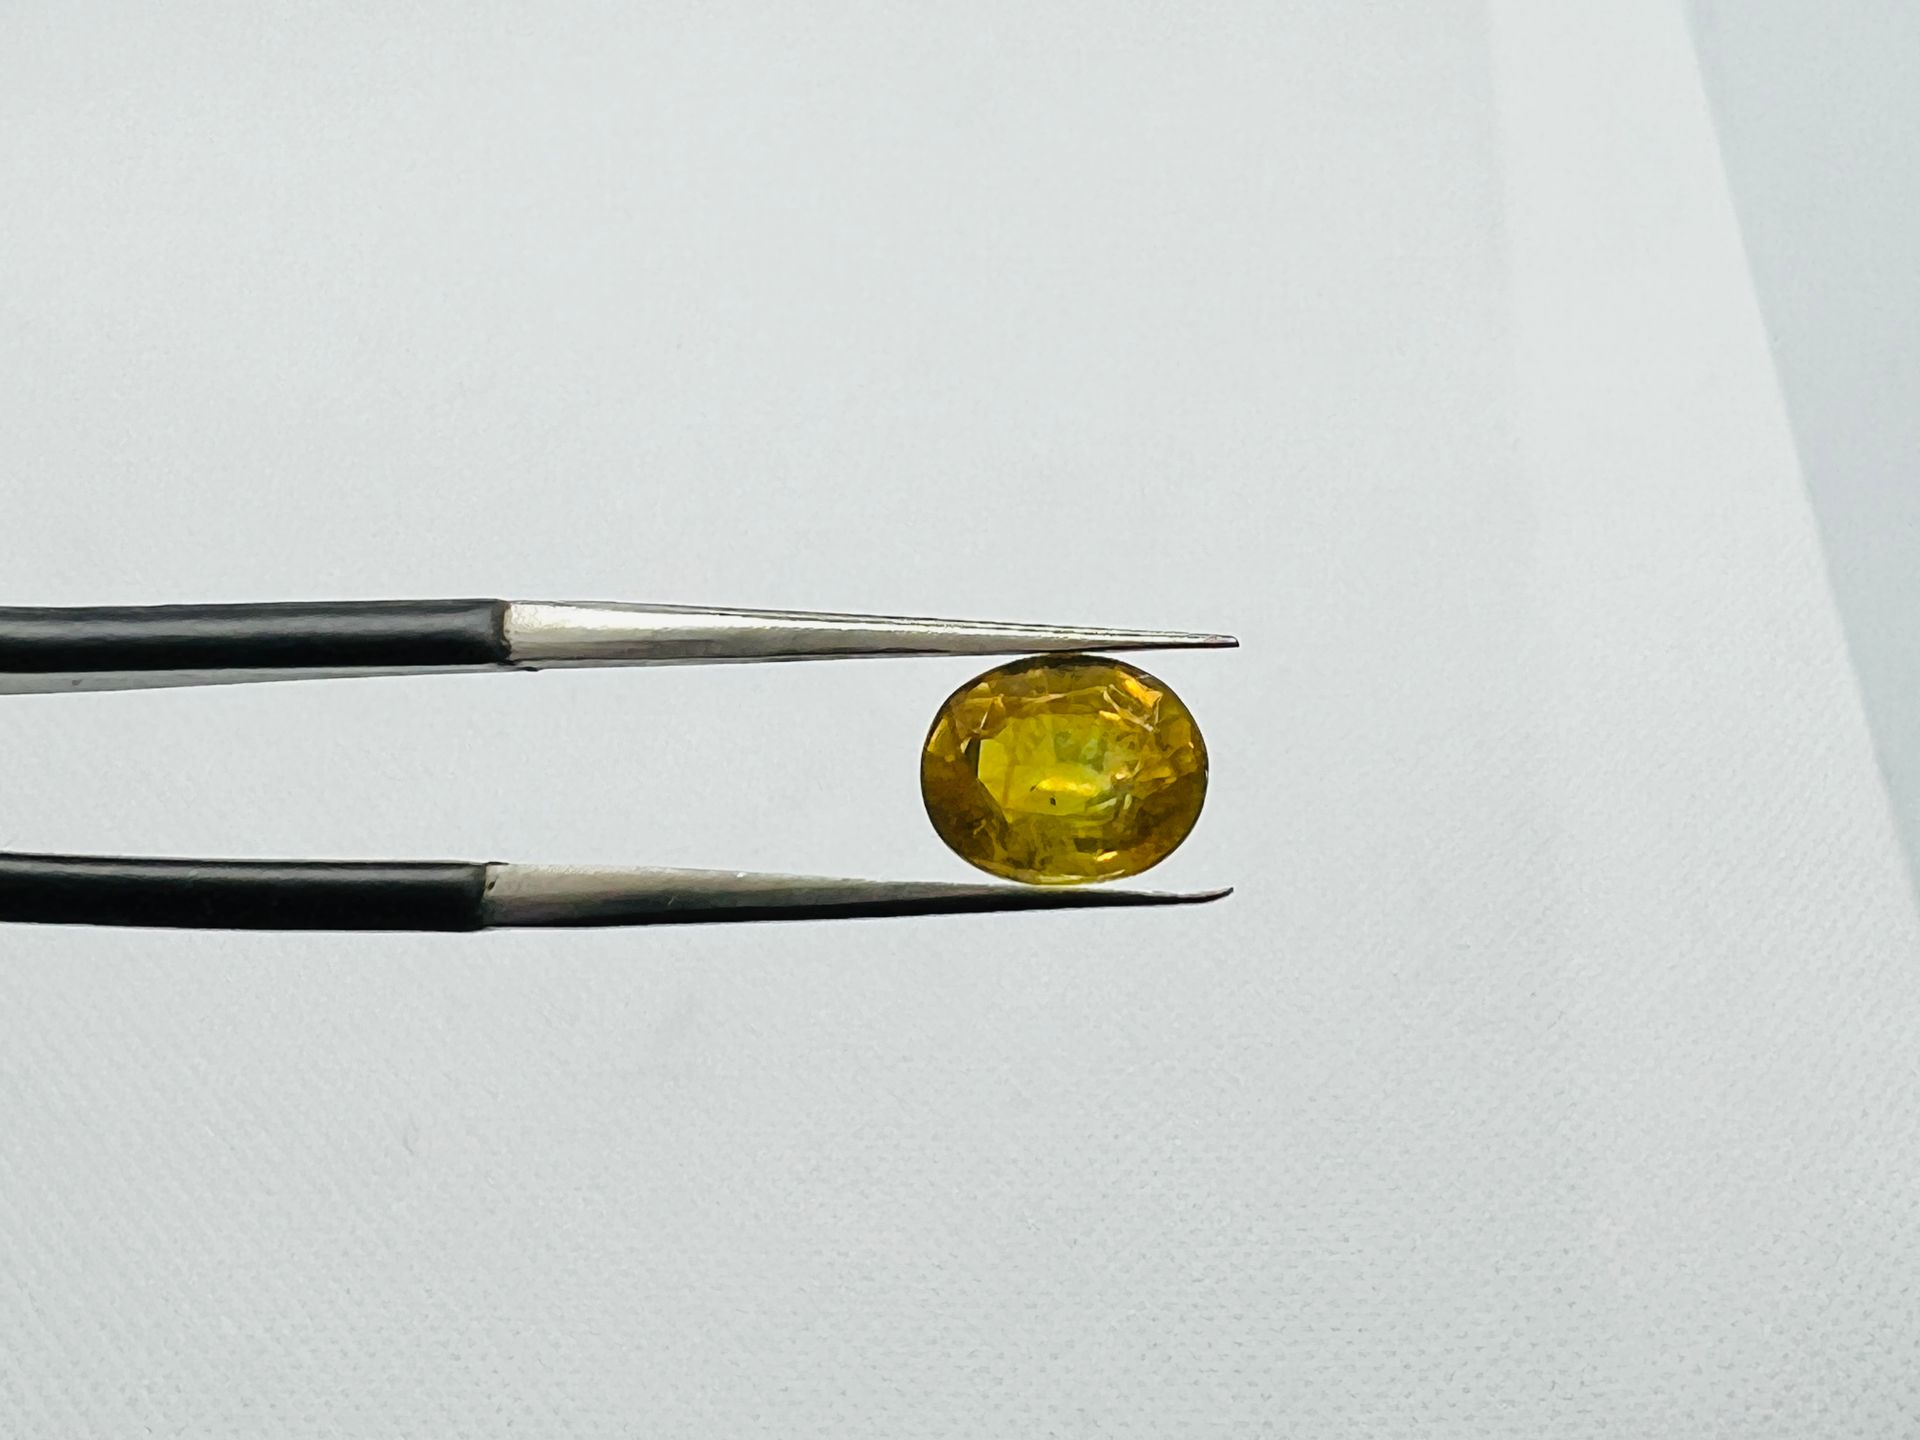 SAPHIRE YELLOW SAPHIRE of 2.20 carats AIGT certificate